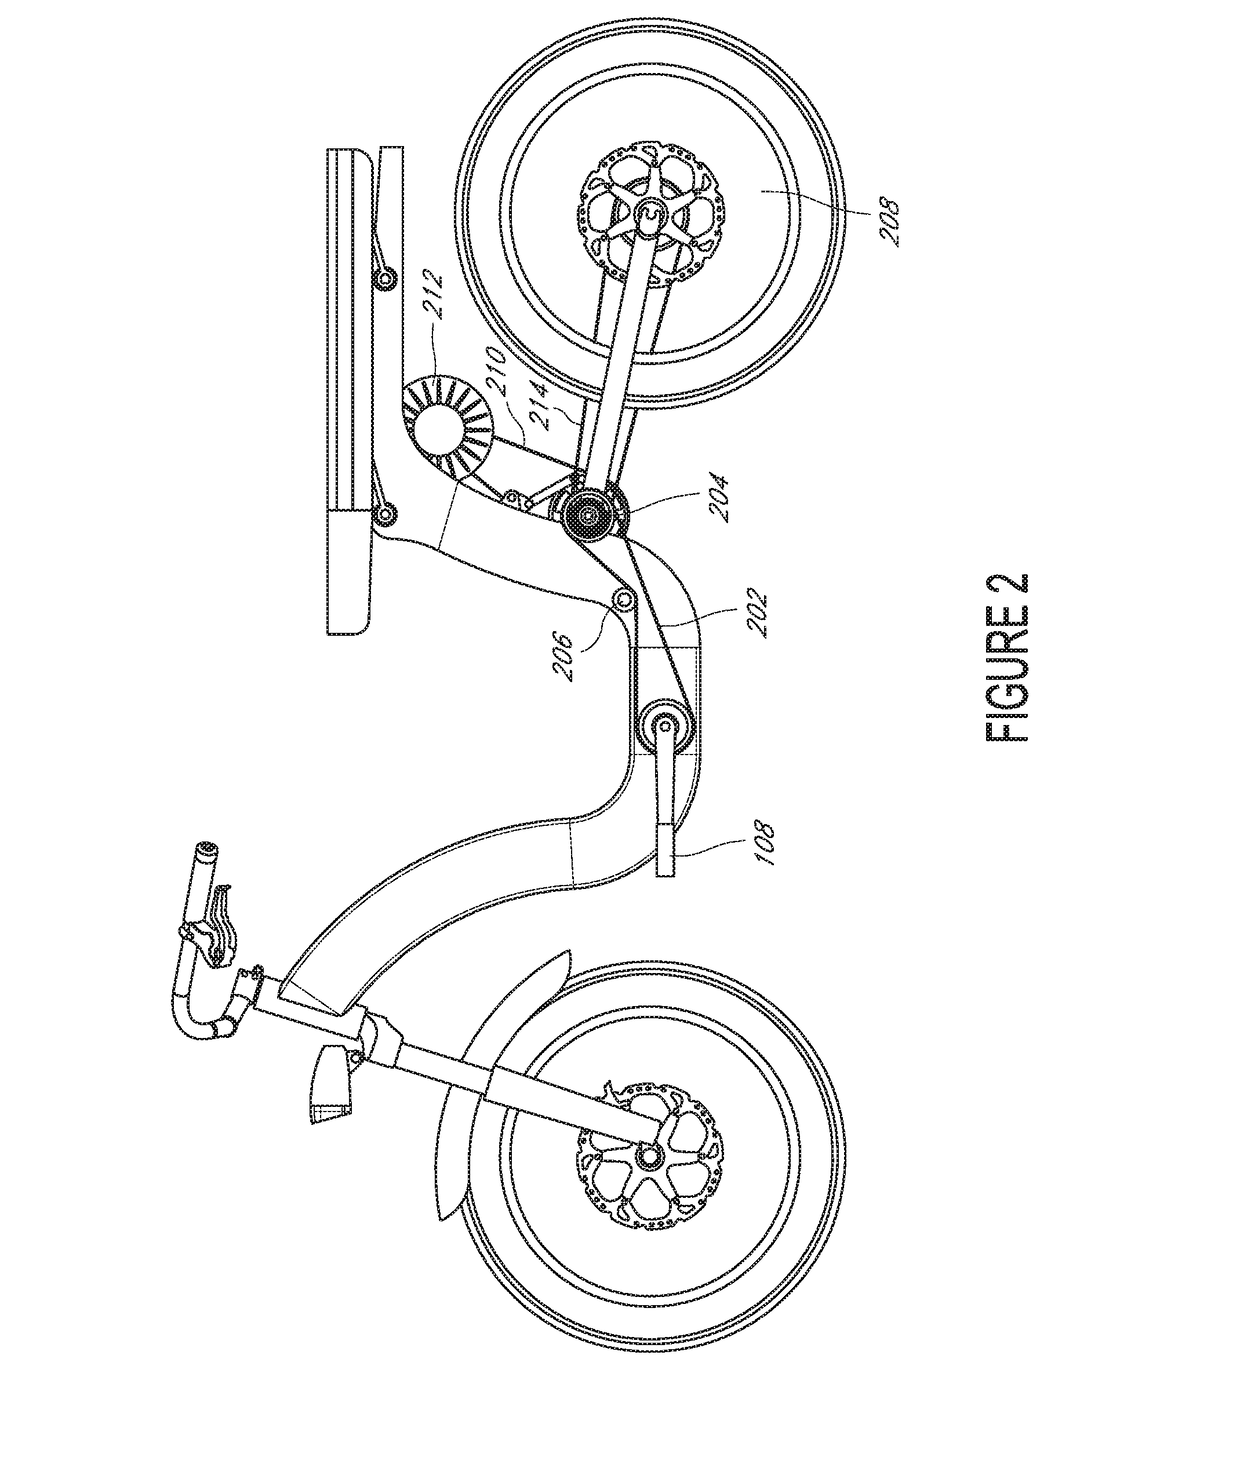 Electric bicycle transmission systems, methods, and devices